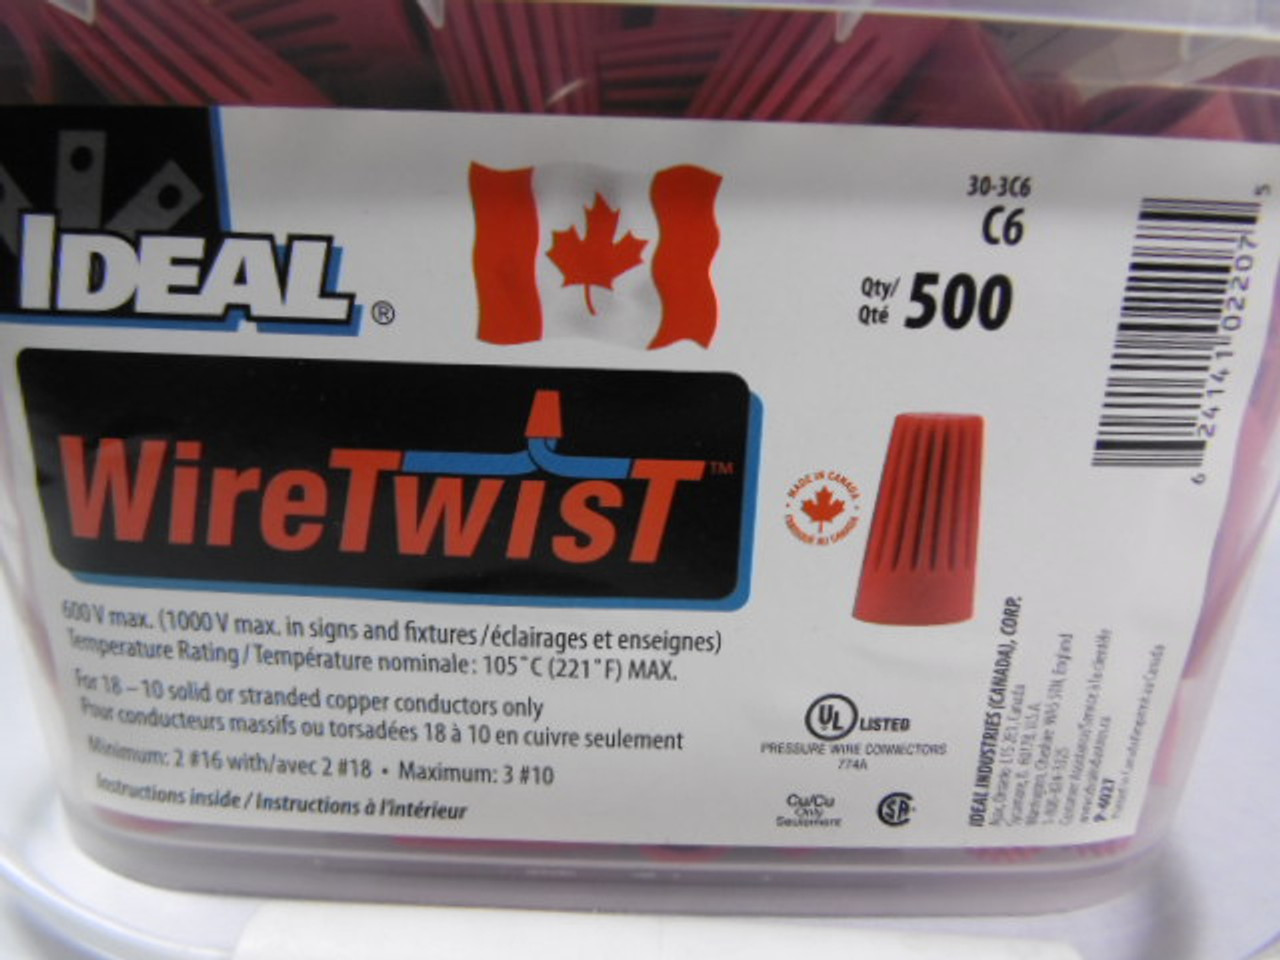 Ideal 30-3C6 Wire Twist 600V Max Case of 500 pcs ! NEW !